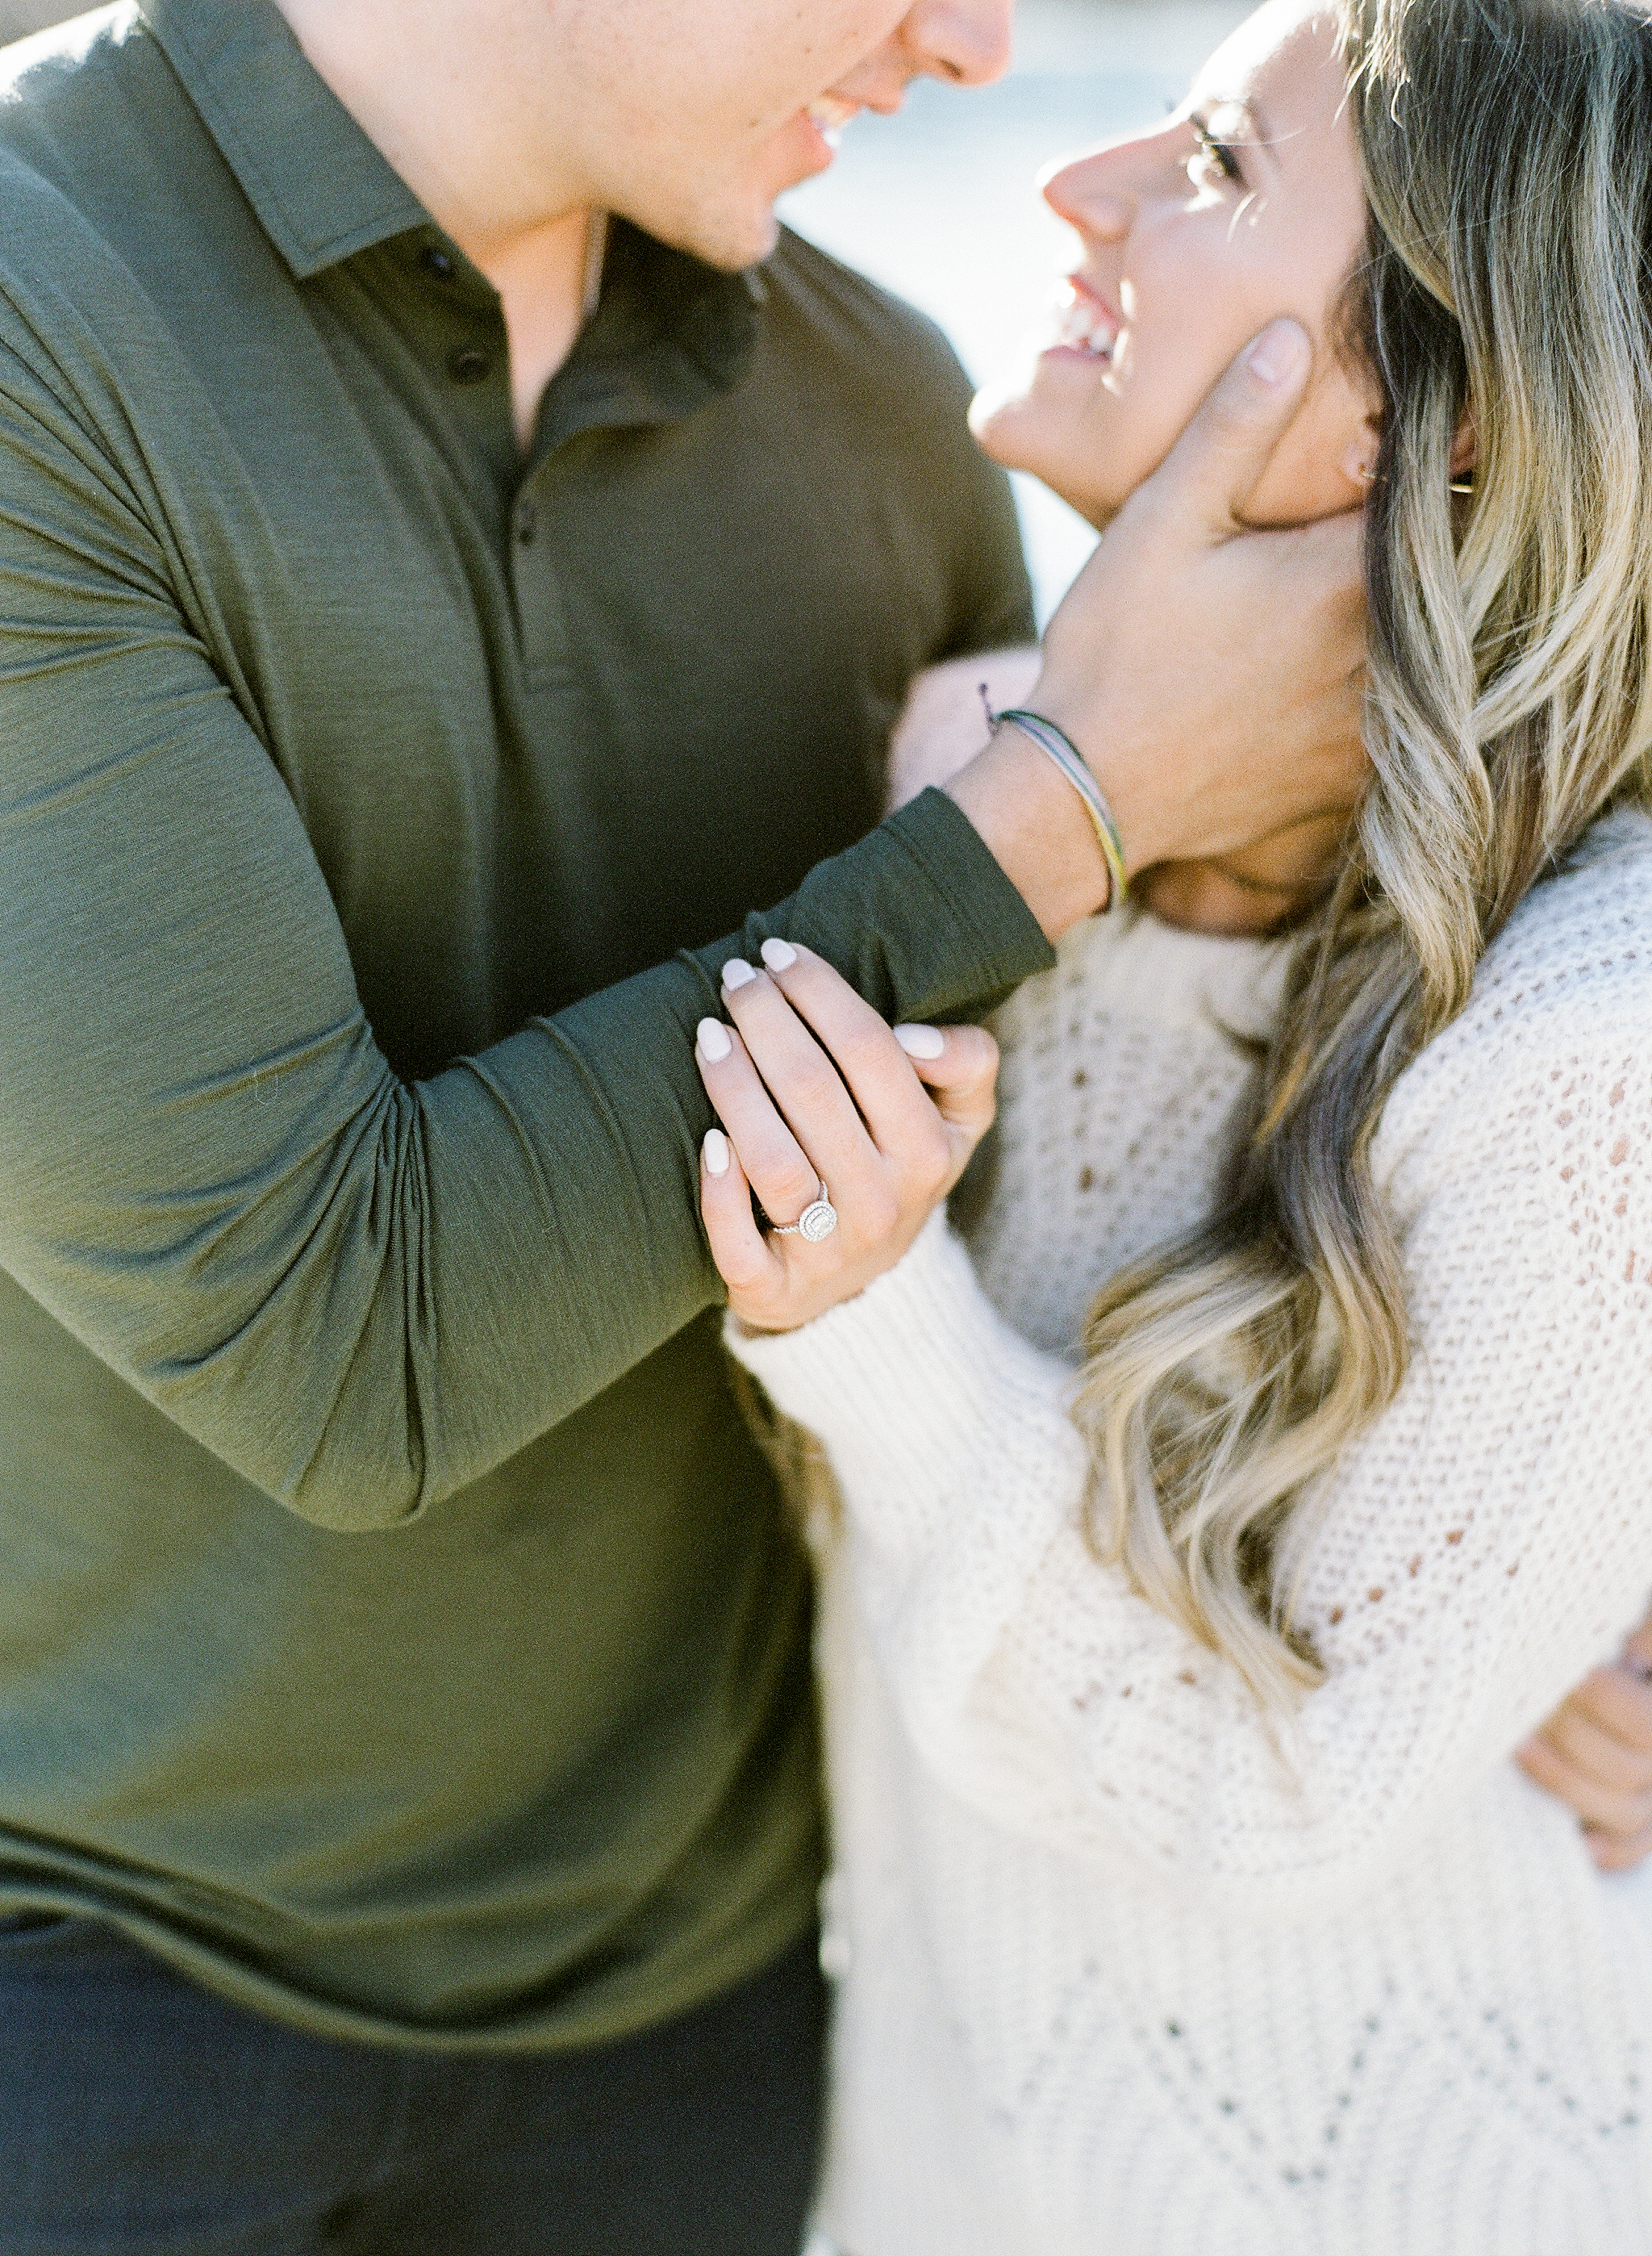 Engagement Session Planning Guide 